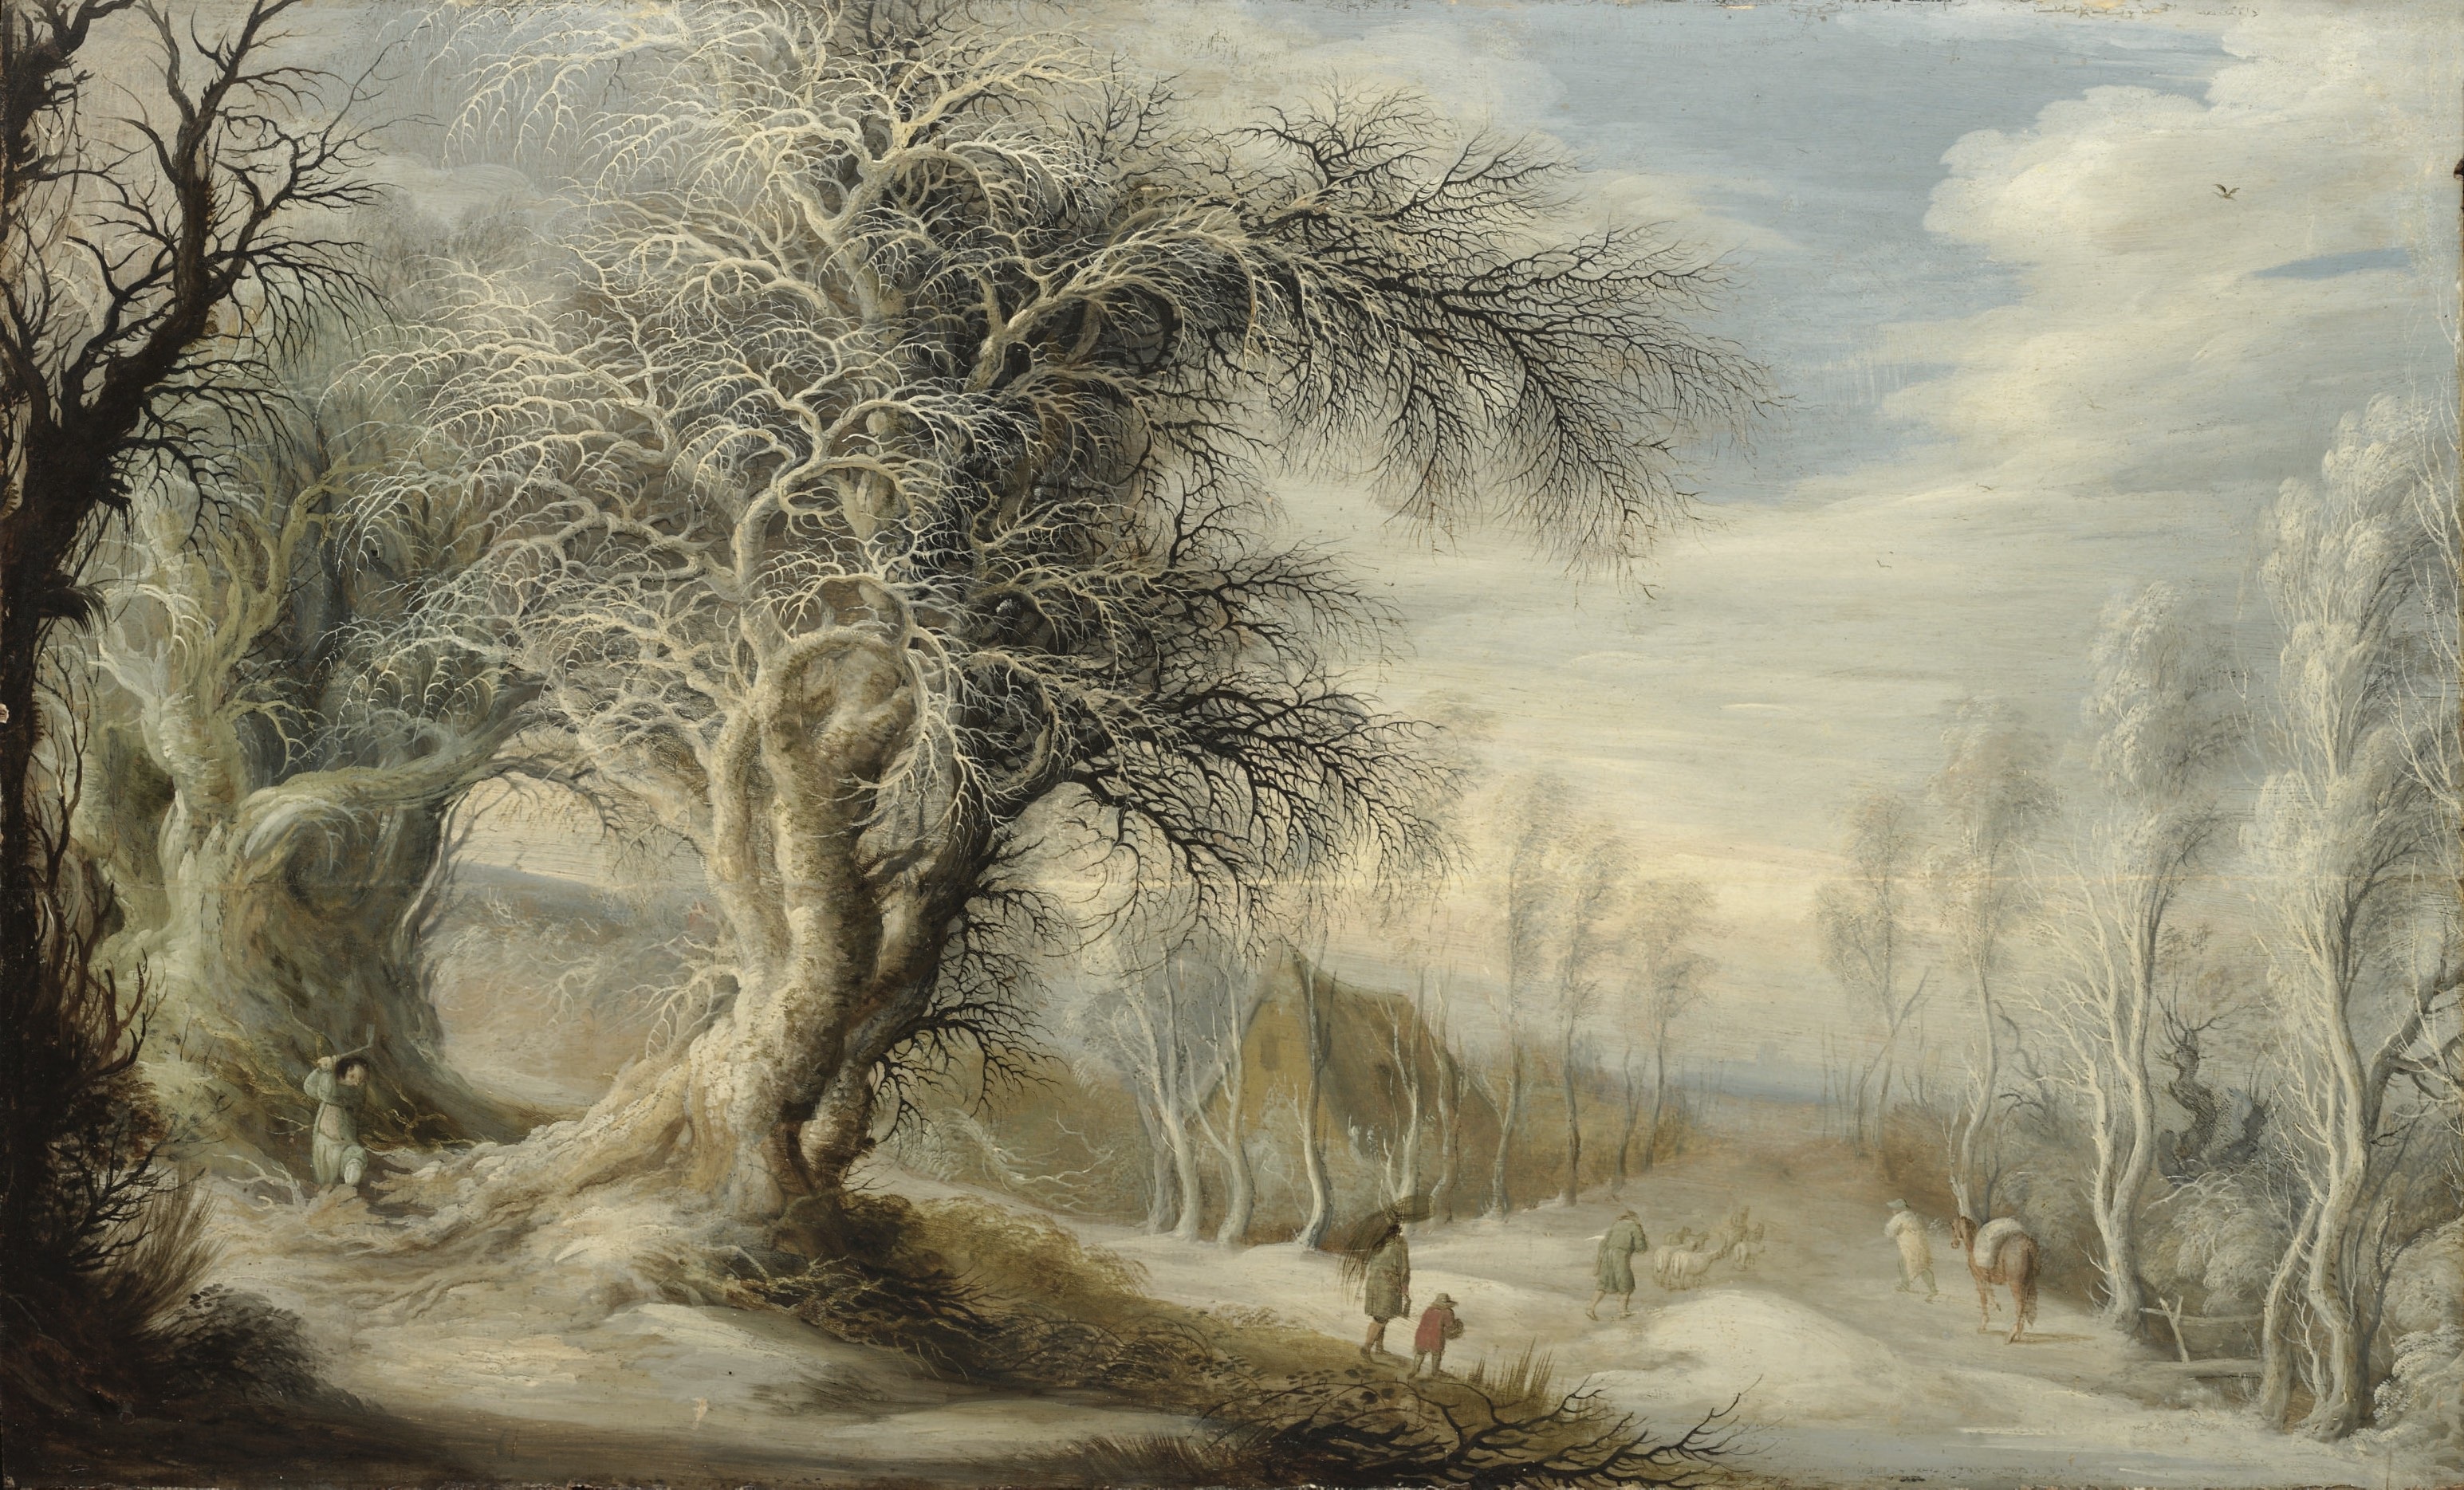 Gijsbrecht Leytens - A winter landscape with a woodsman and travellers